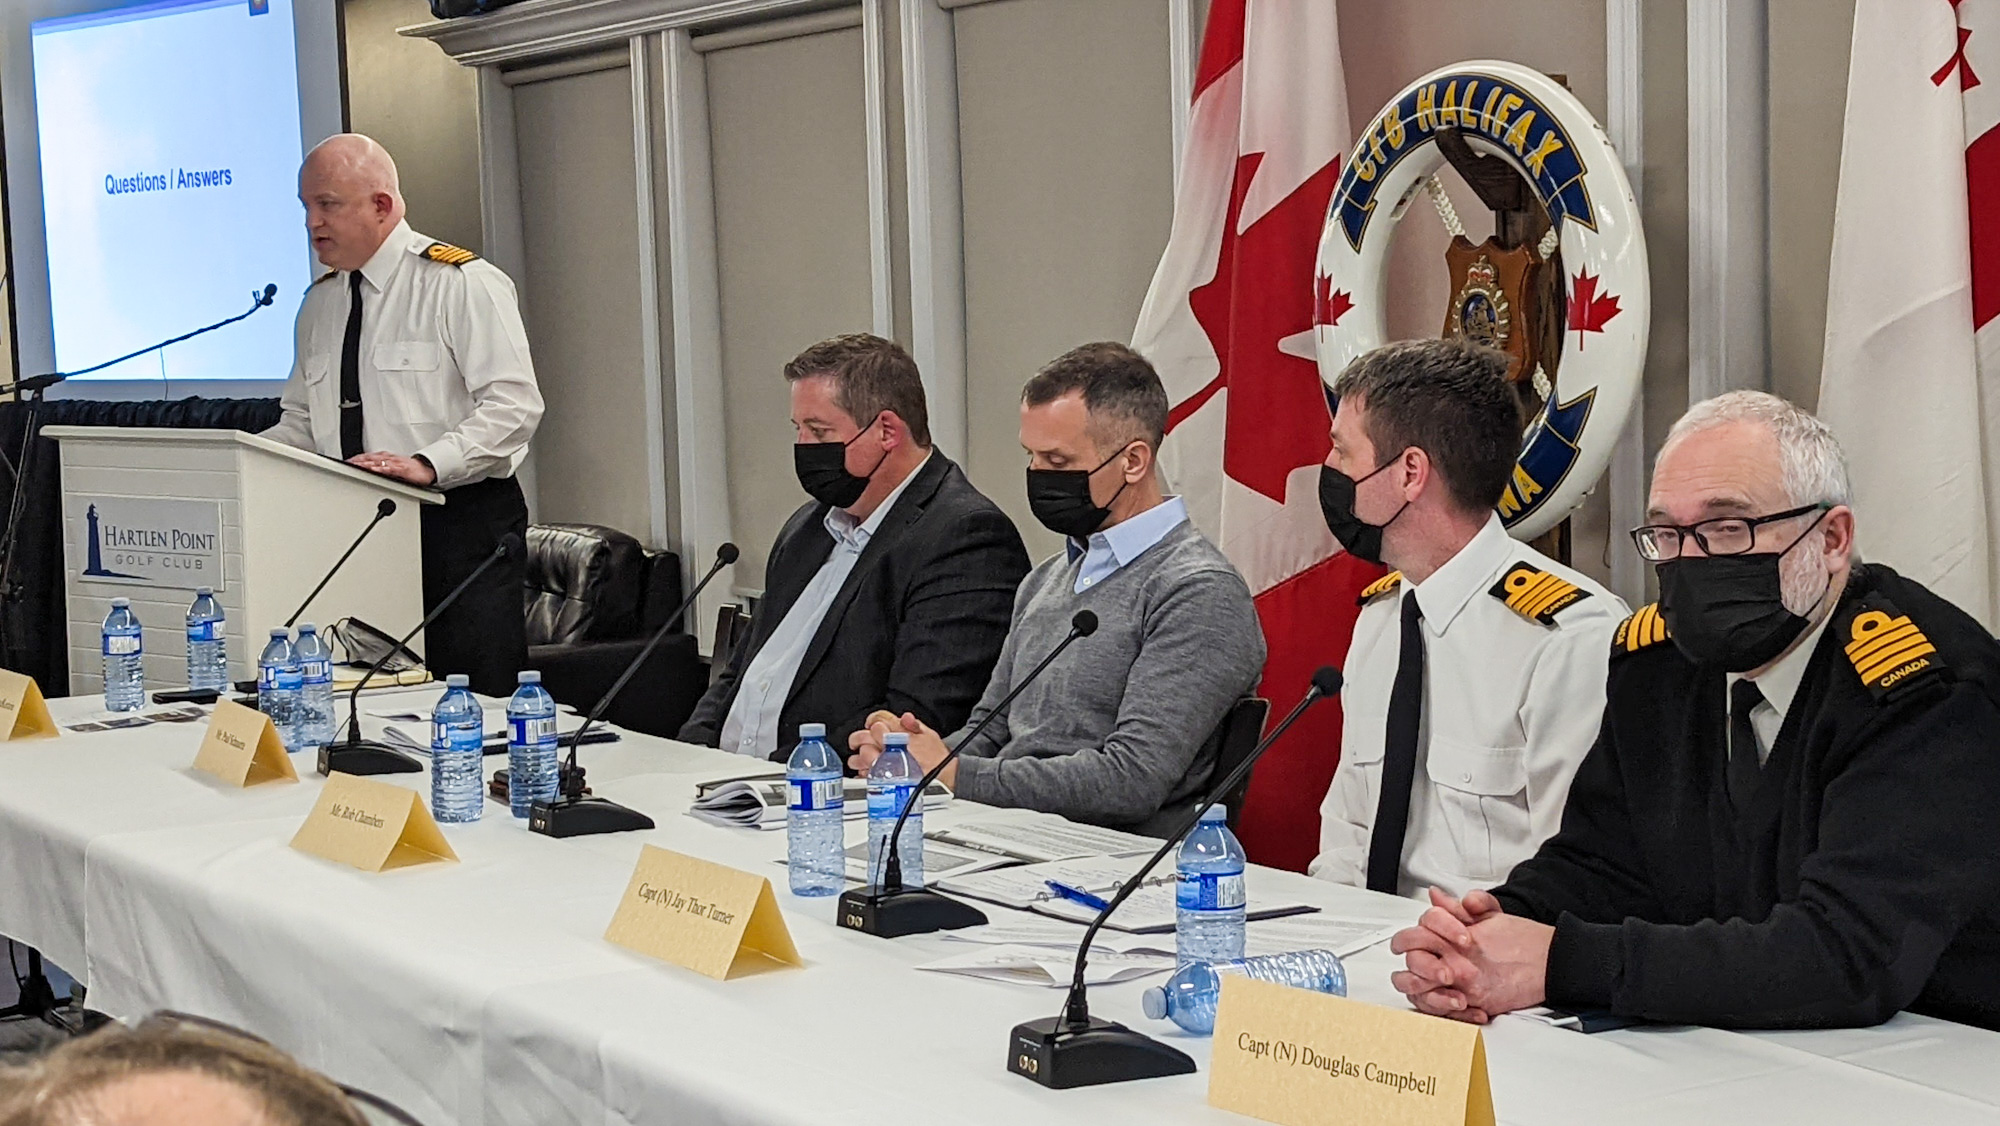 Officials address the crowd at a public meeting on a proposed DND facility last week. Left to right are Capt. Andy MacKenzie, base commander CFB Halifax; Paul Schauerte, director of DND construction project delivery; Rob Chambers, assistant deputy minister of infrastructure and environment; Capt. Jay Thor Turner, CSC deputy project manager; and Capt. Douglas Campbell, director of naval major projects. 